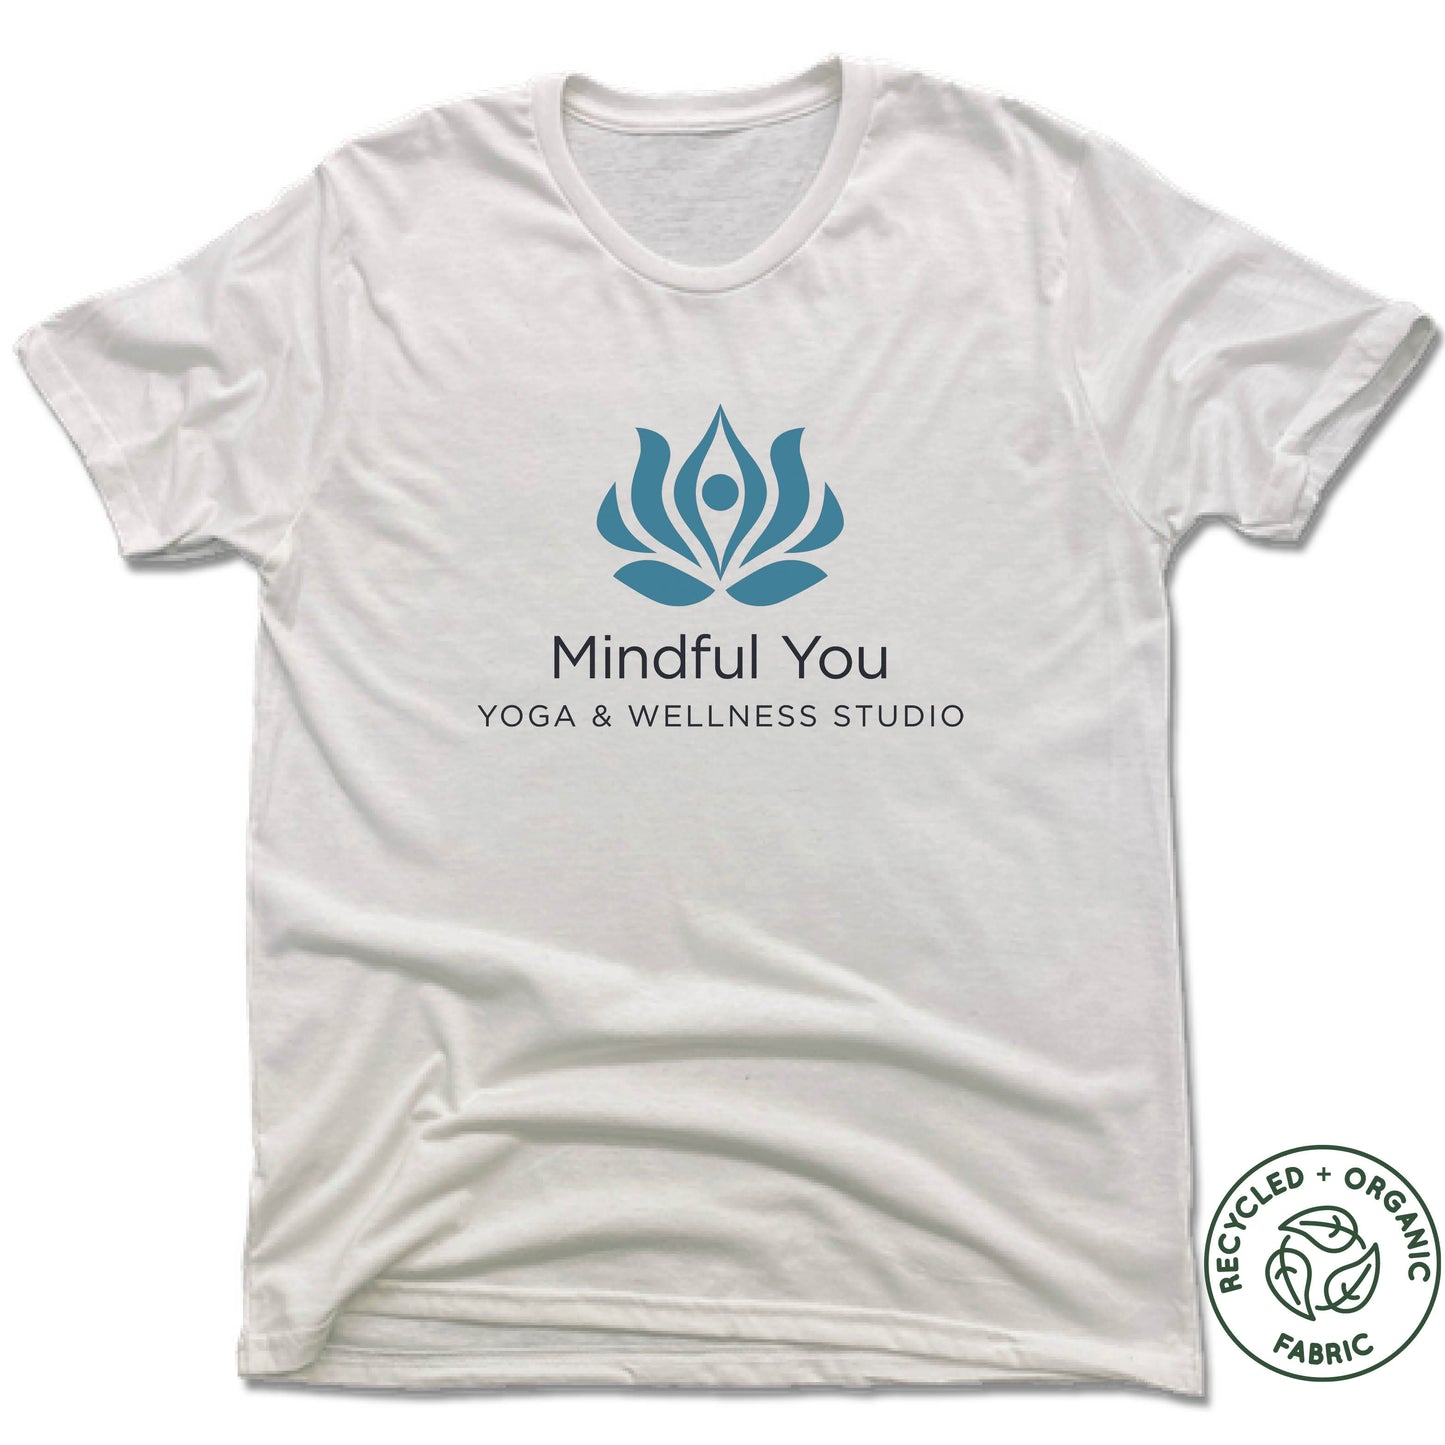 MINDFUL YOU YOGA & WELLNESS | UNISEX WHITE Recycled Tri-Blend | COLOR LOGO